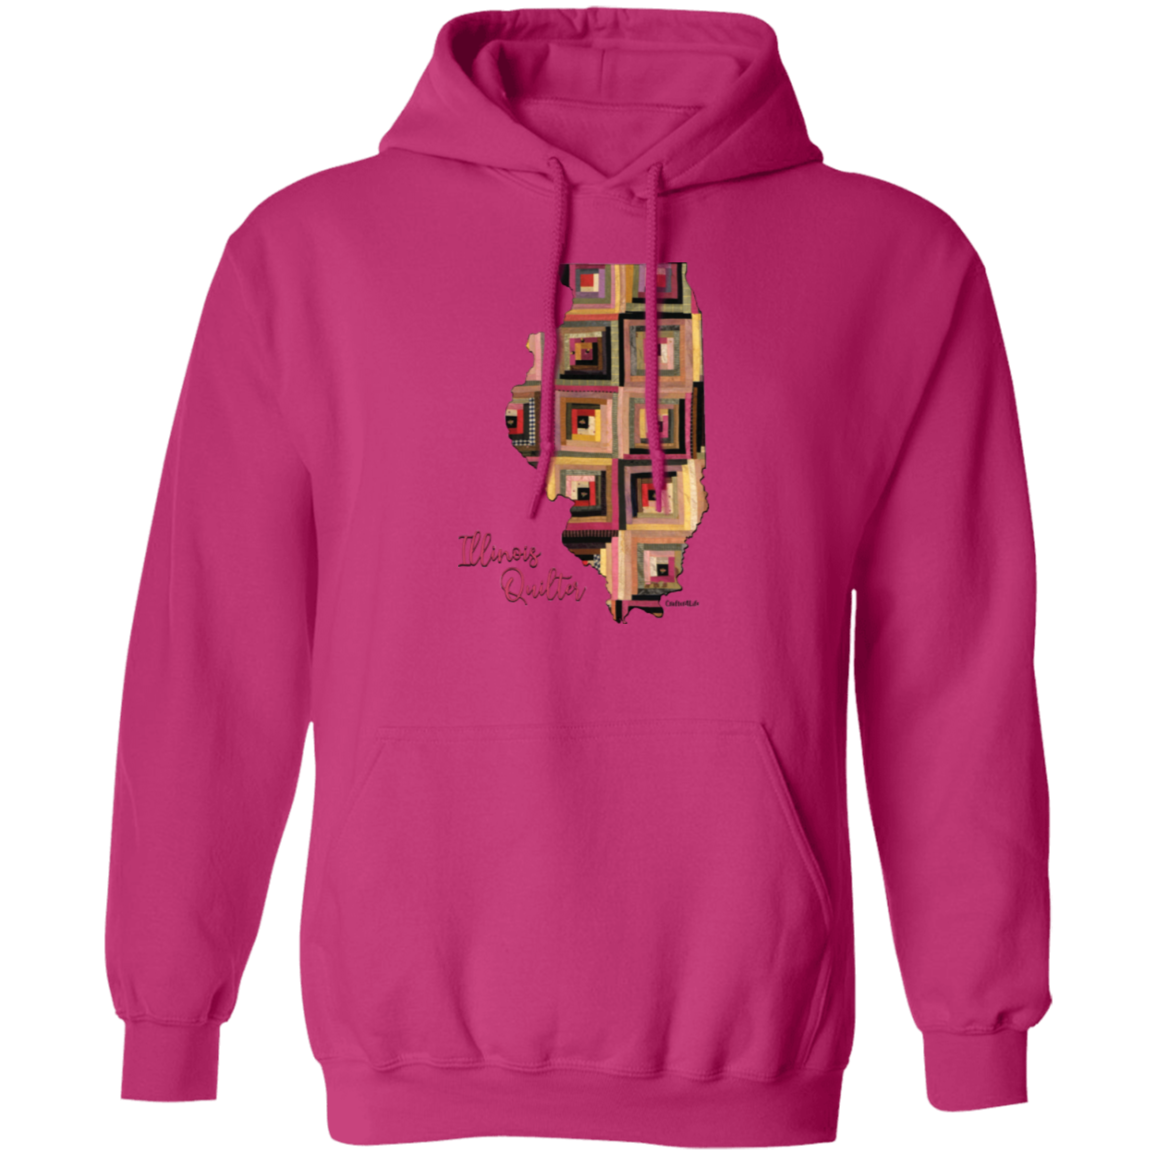 Illinois Quilter Pullover Hoodie, Gift for Quilting Friends and Family